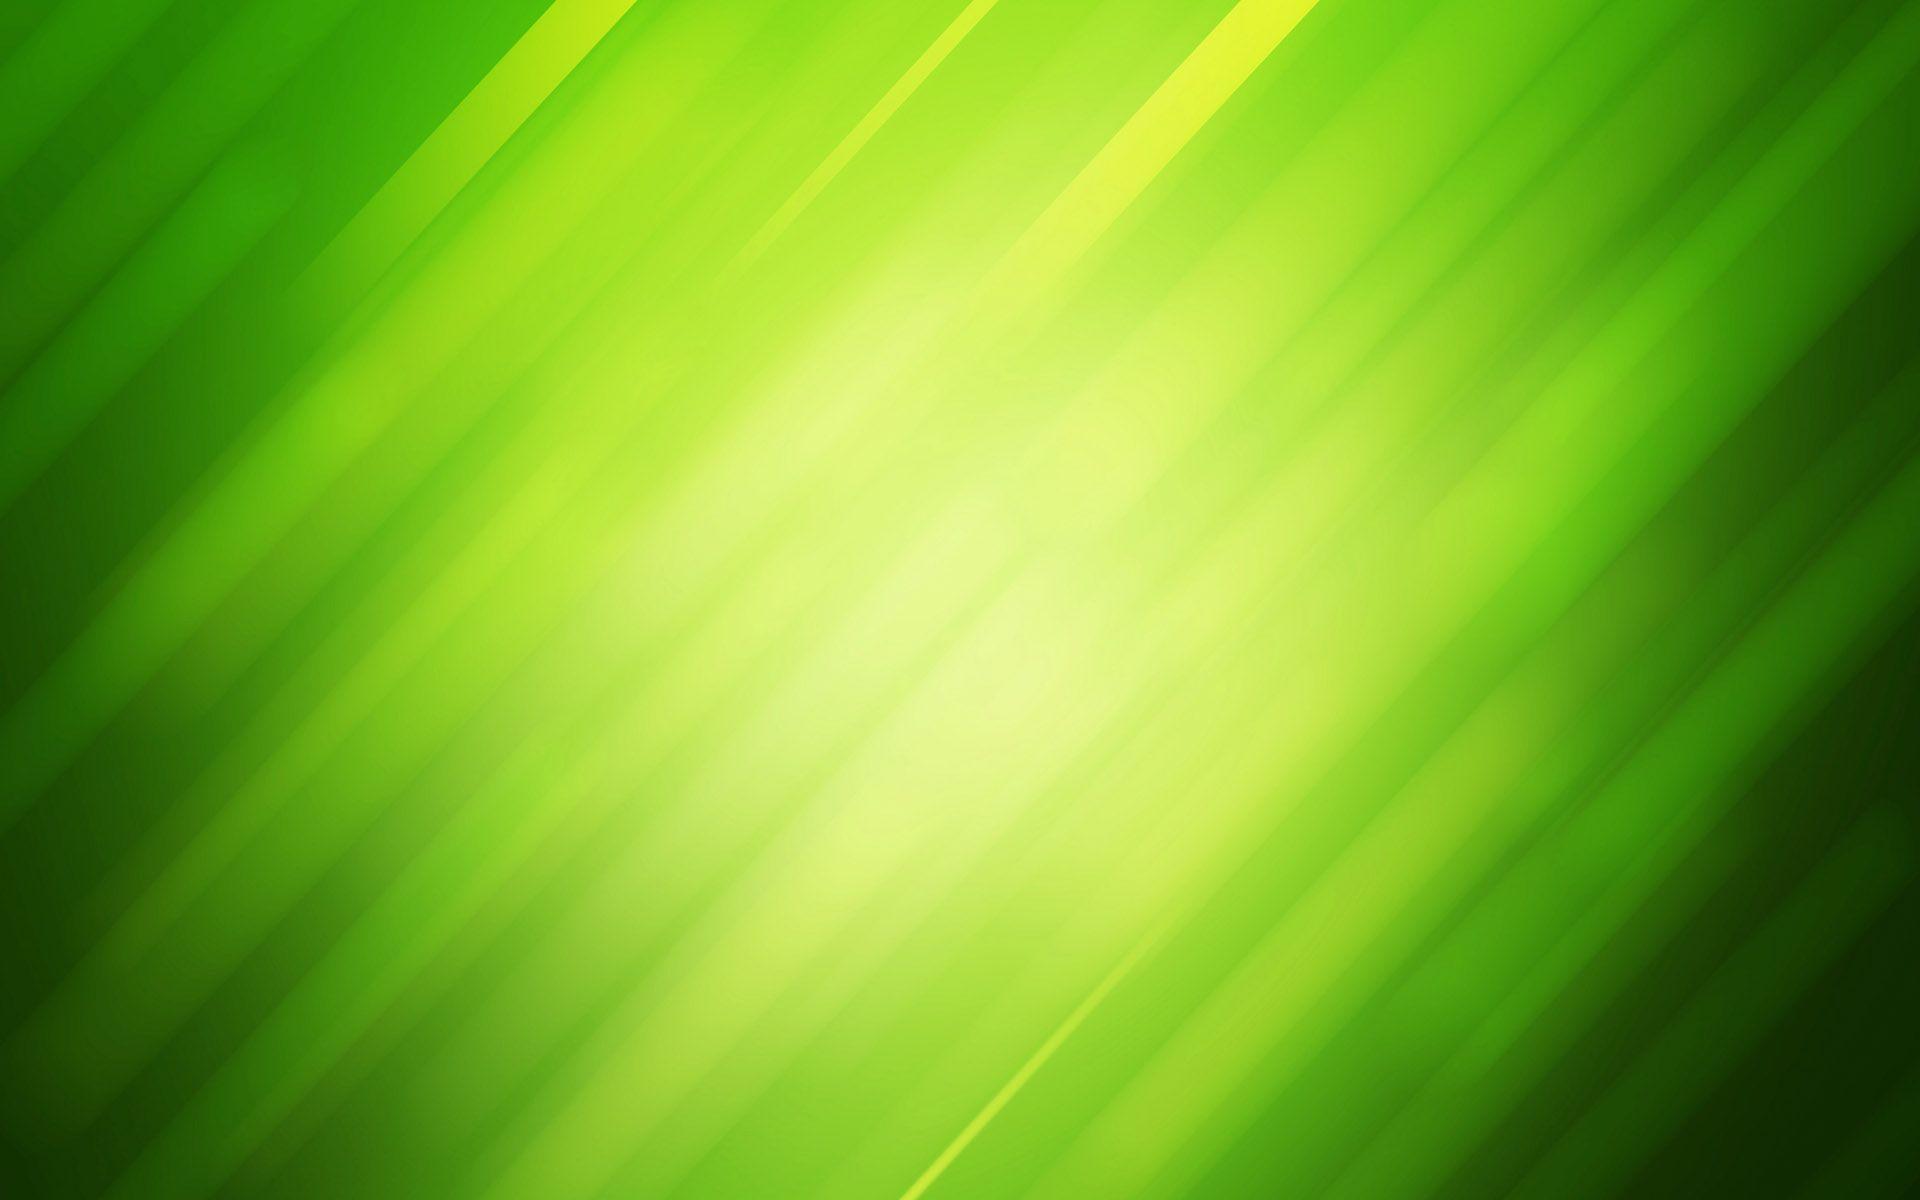 Green 4K Colored Background 4731 Image HD Wallpaper. Wallpaper